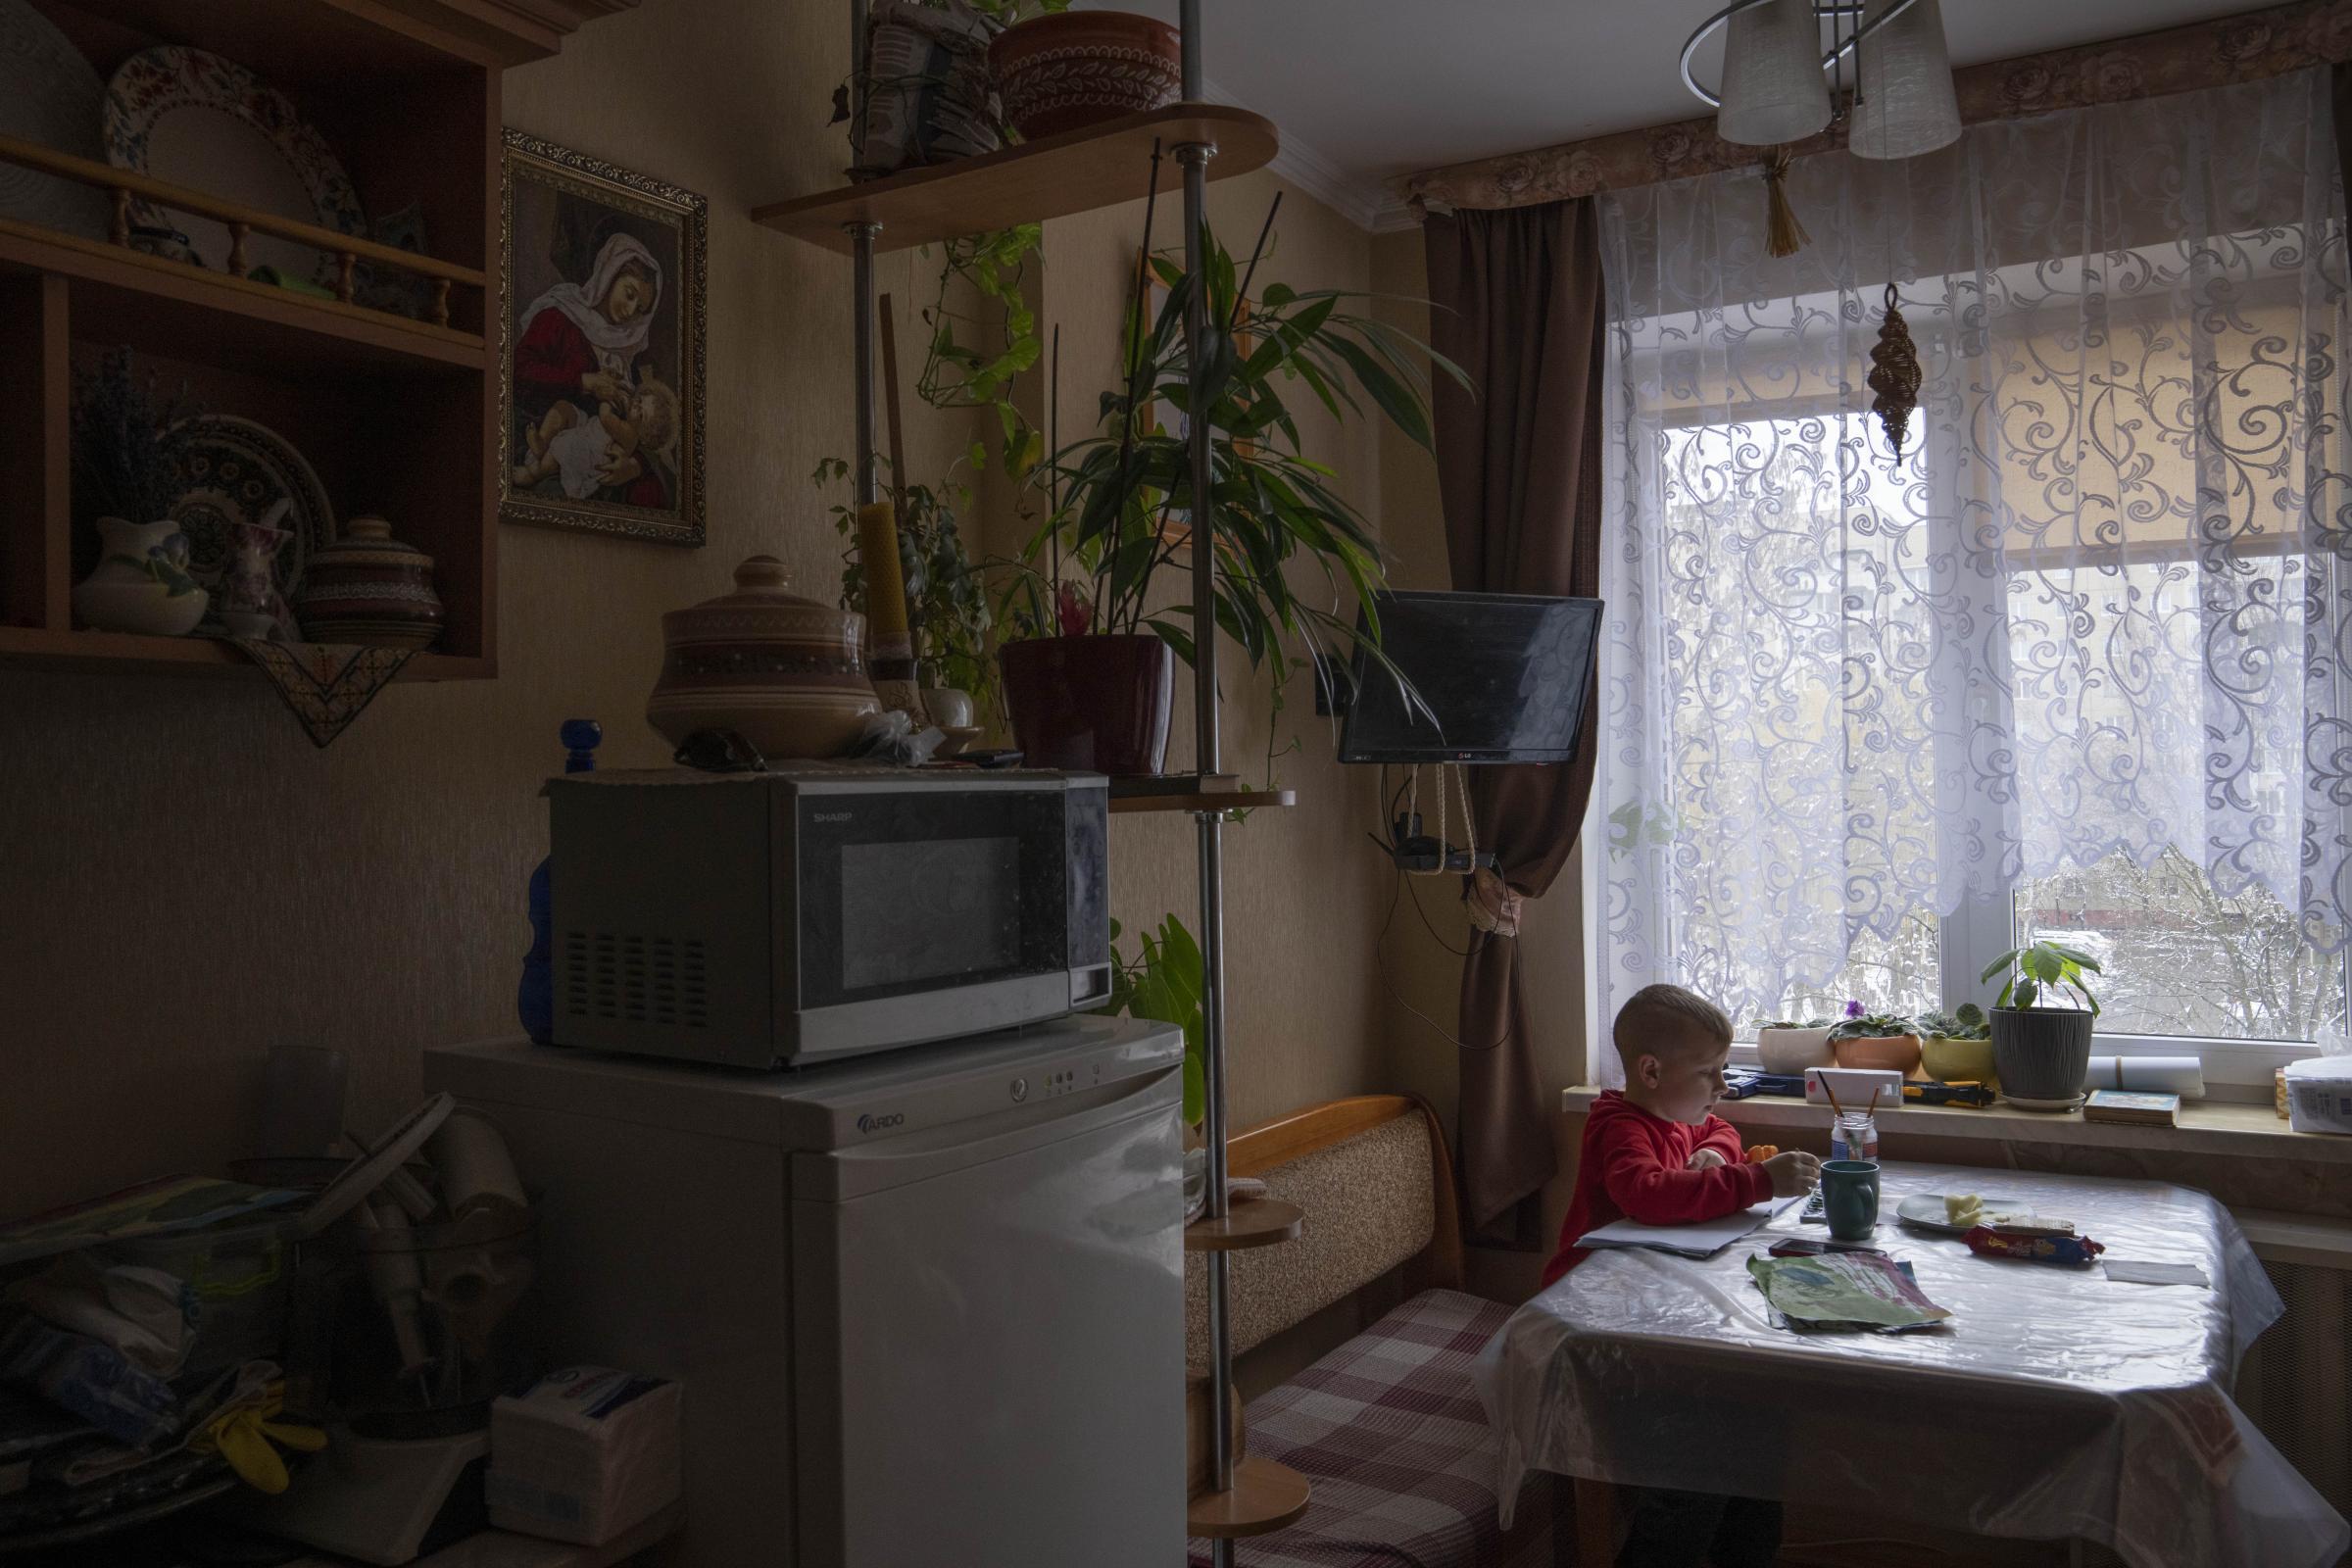 Stories of Ukraine's families during war - Nazar, paints in the kitchen of an apartment given to his...